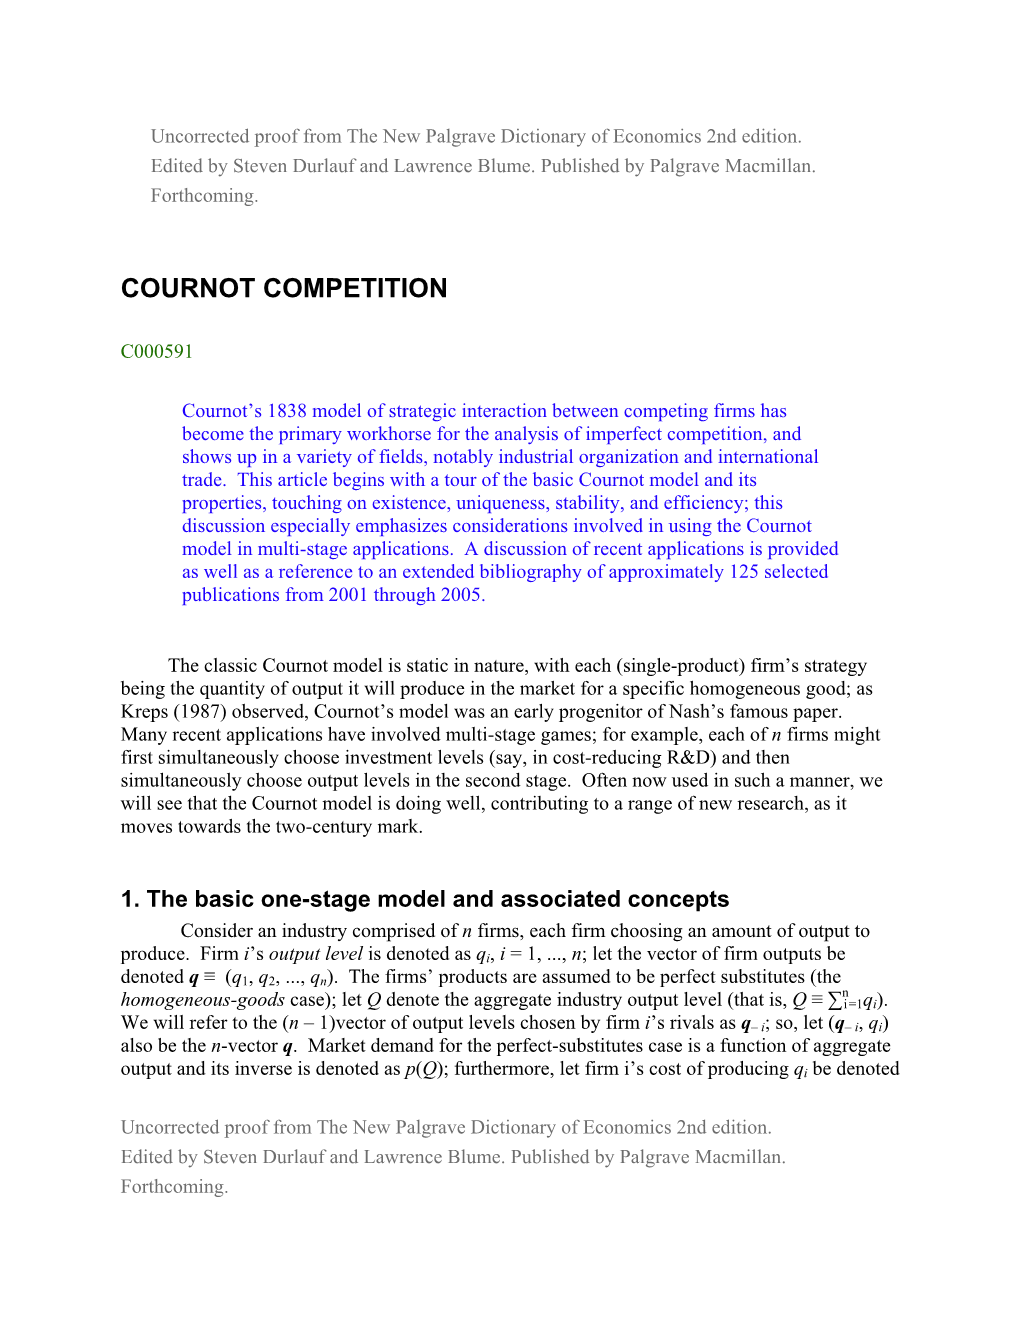 Cournot Competition